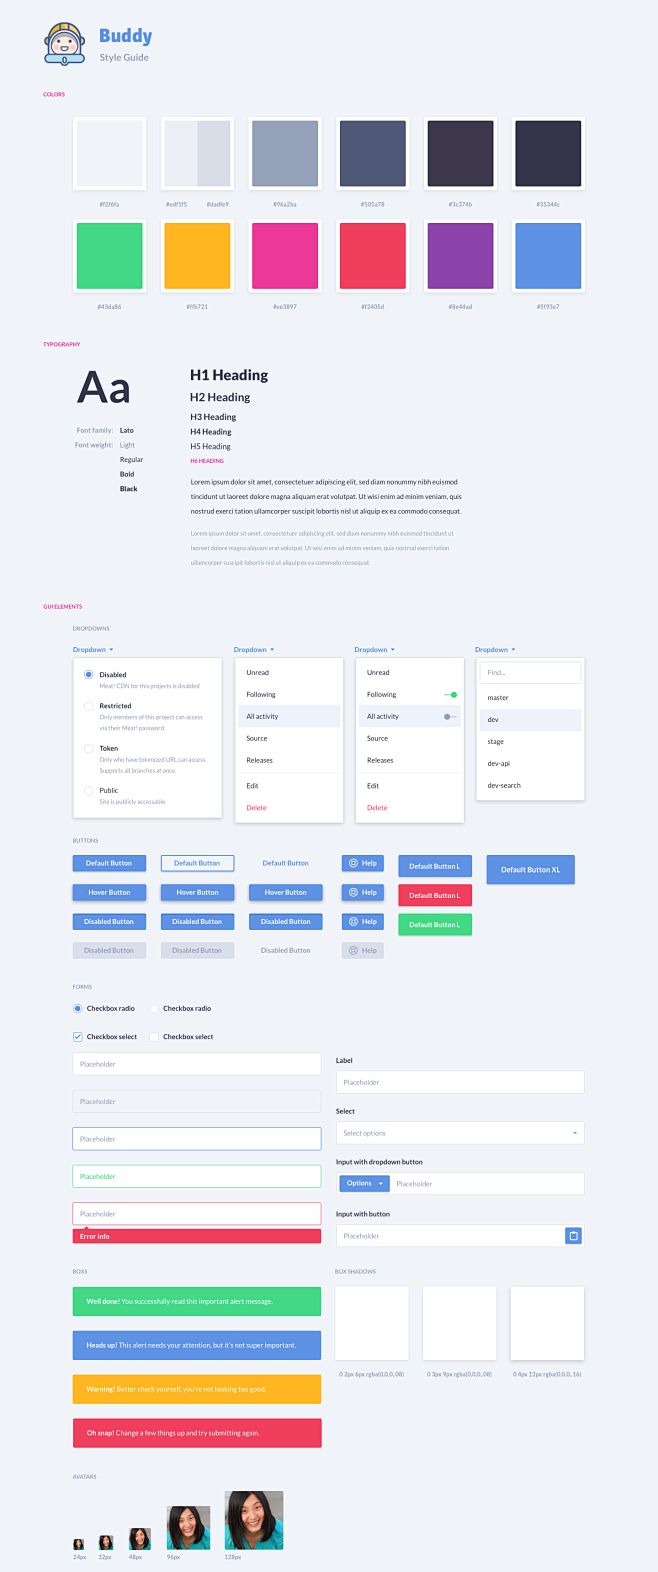 Ui style guide